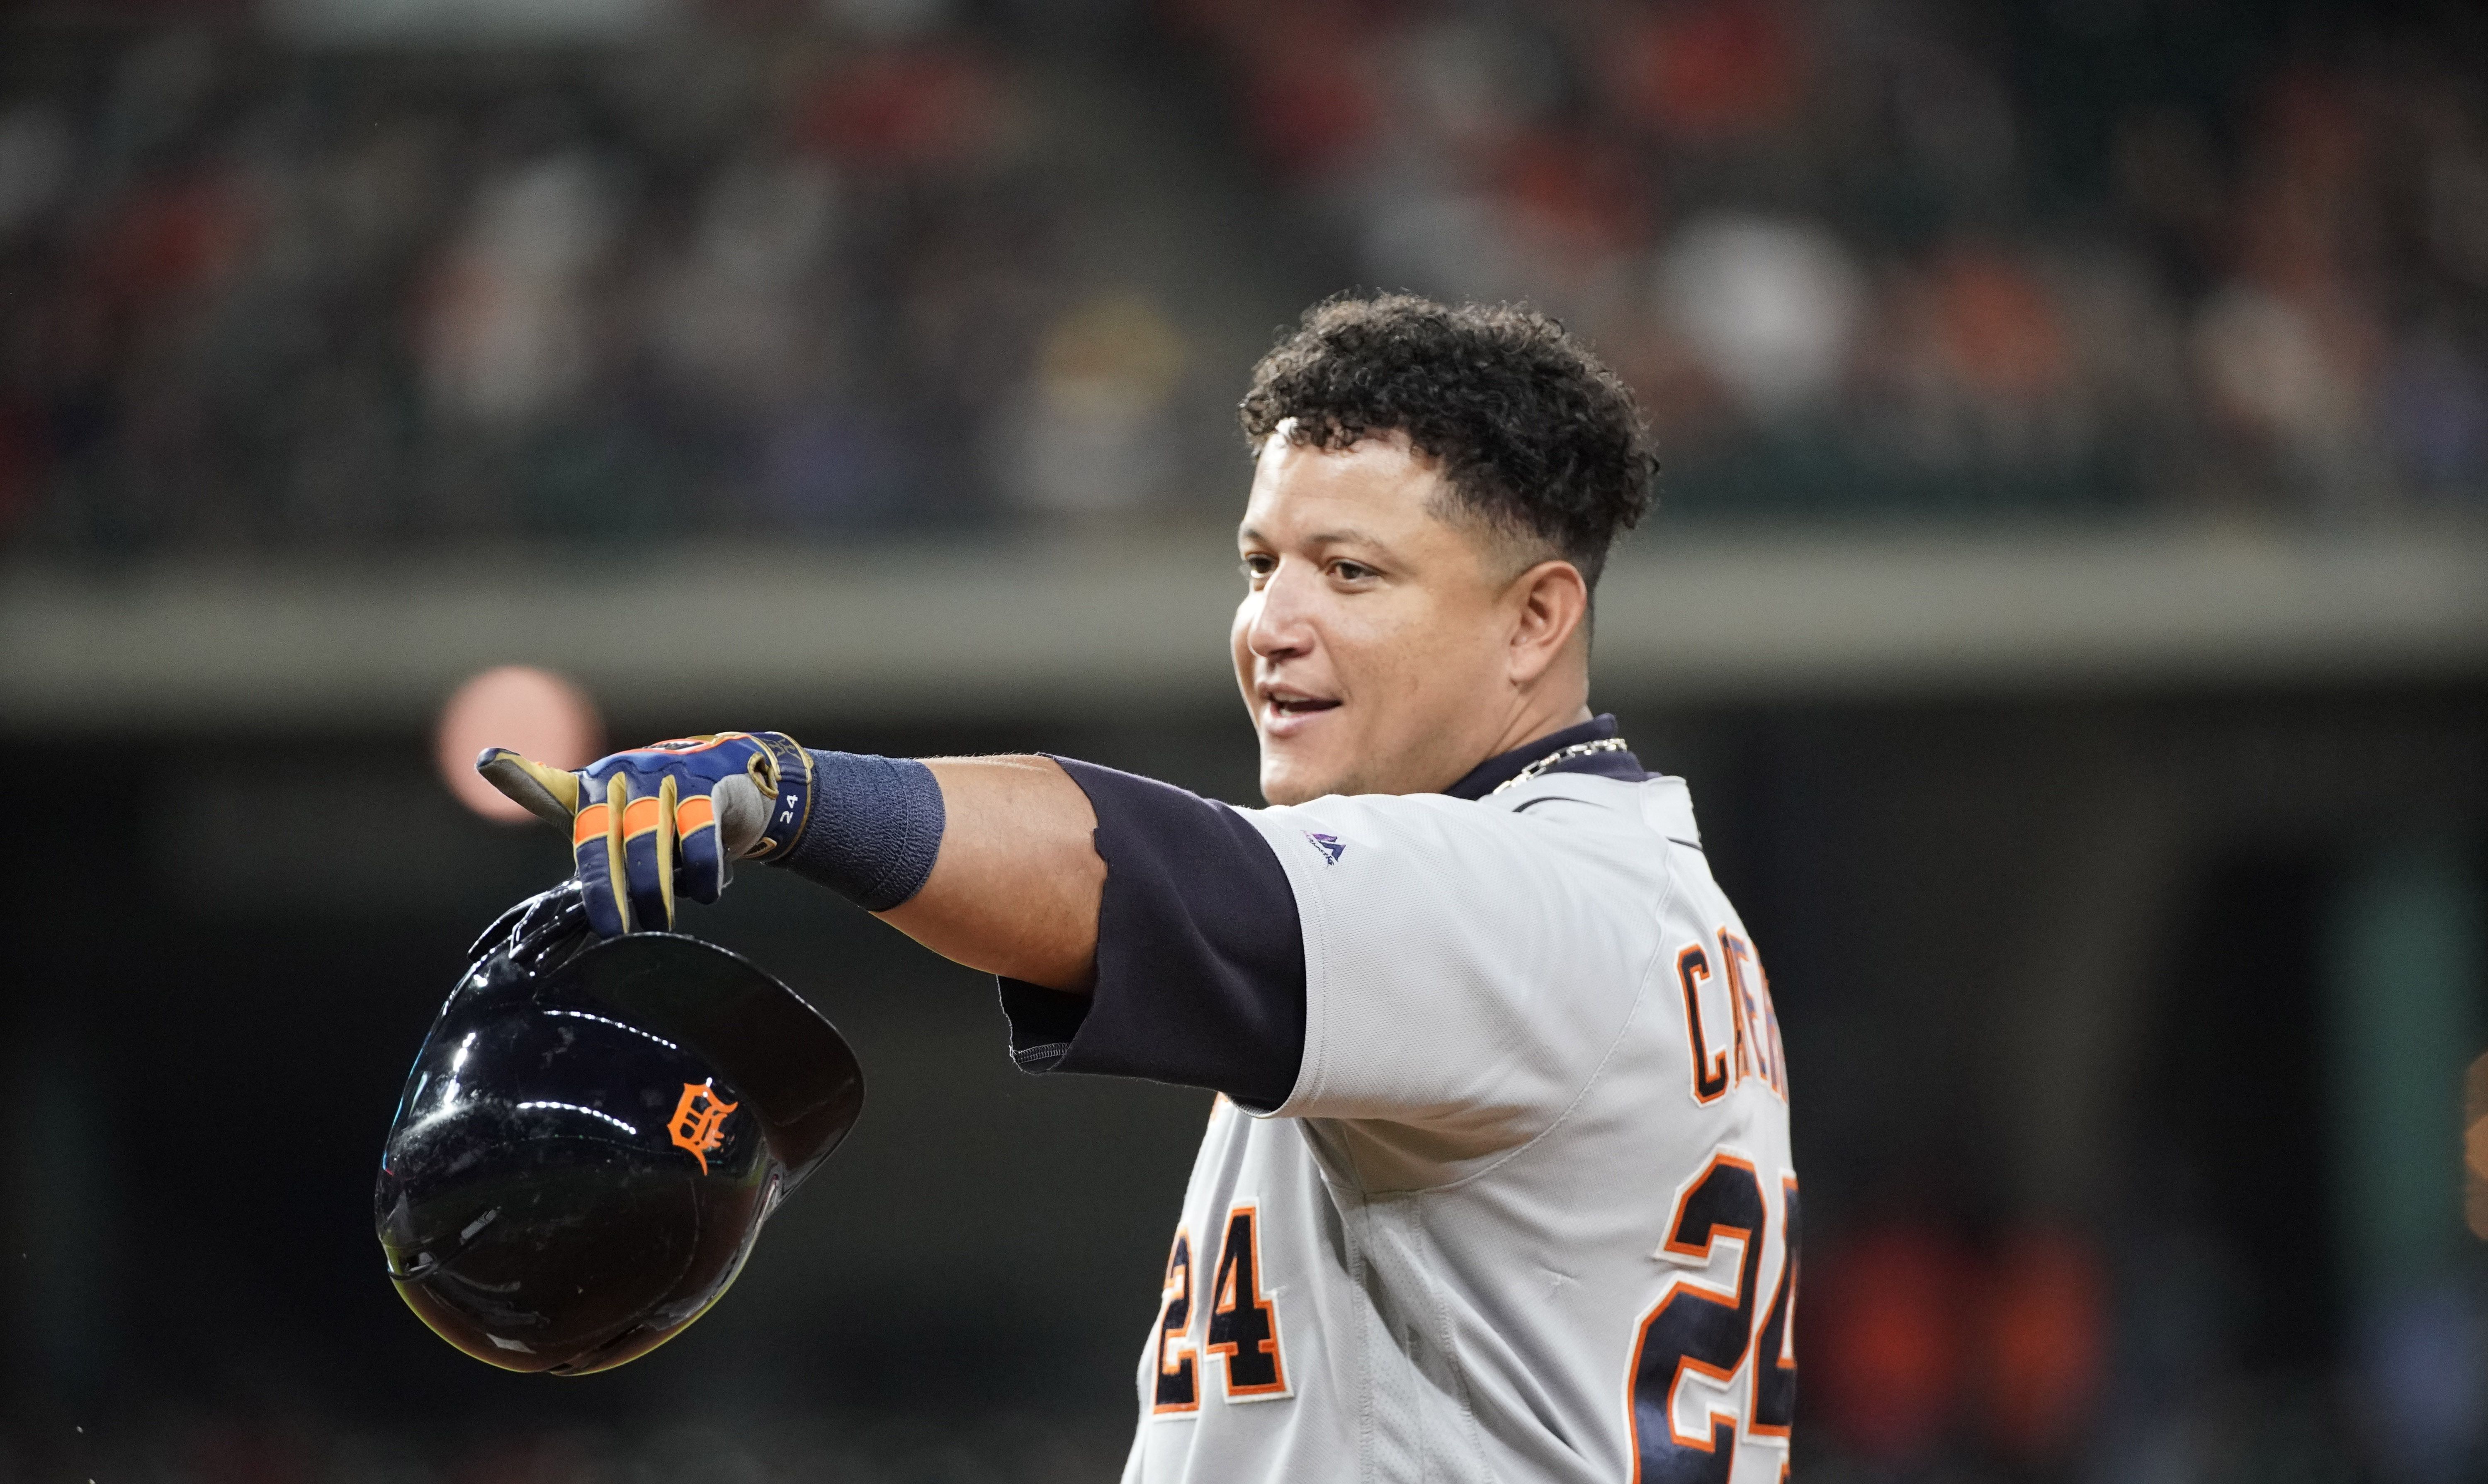 The Machine vs. Miggy: Debating Two of the Best Players of the